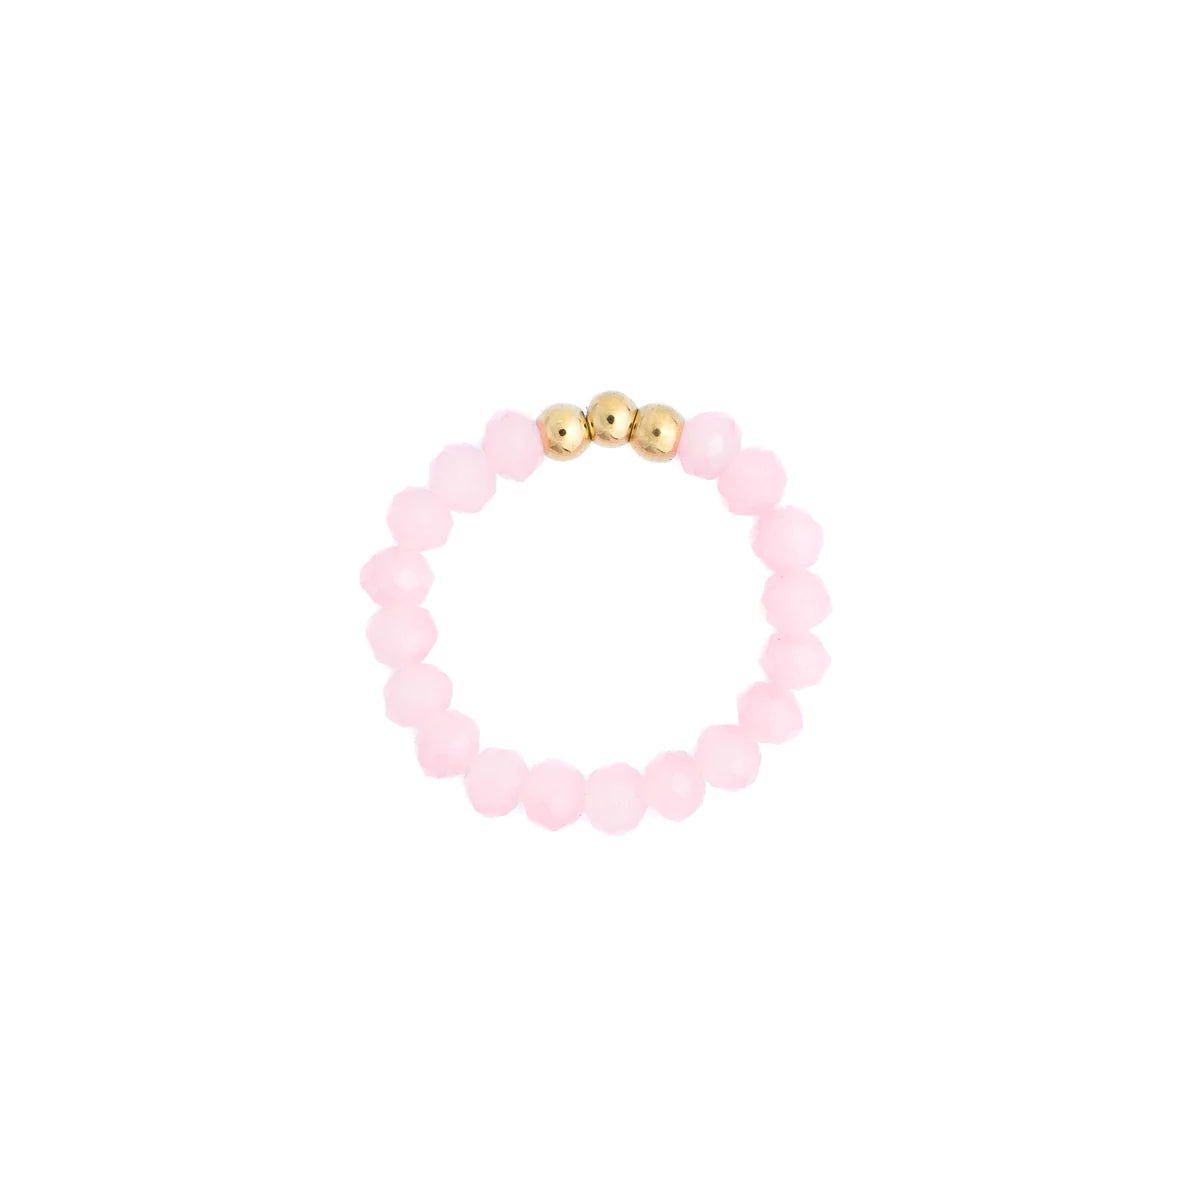 Crystal Bead Ring 3mm Sparkled Rose